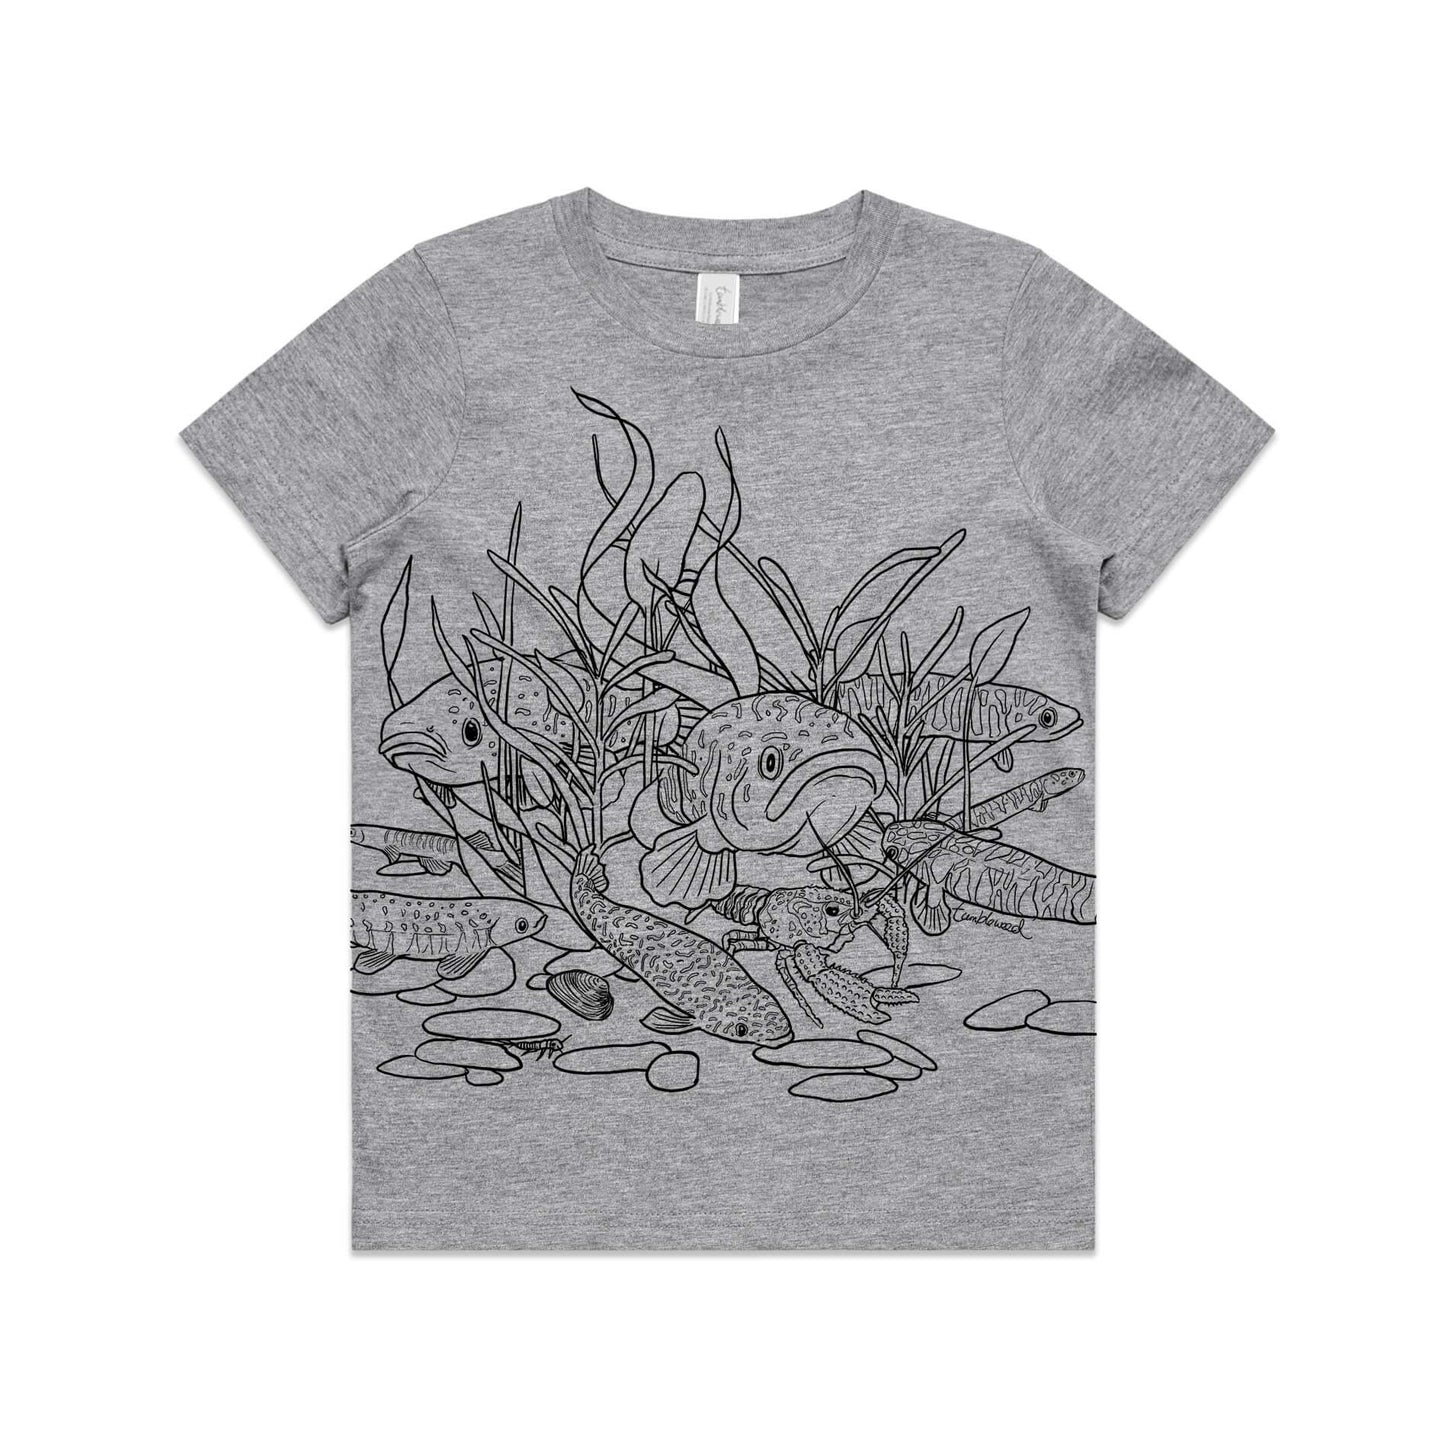 Grey marle, cotton kids' t-shirt with screen printed freshwater fish design.